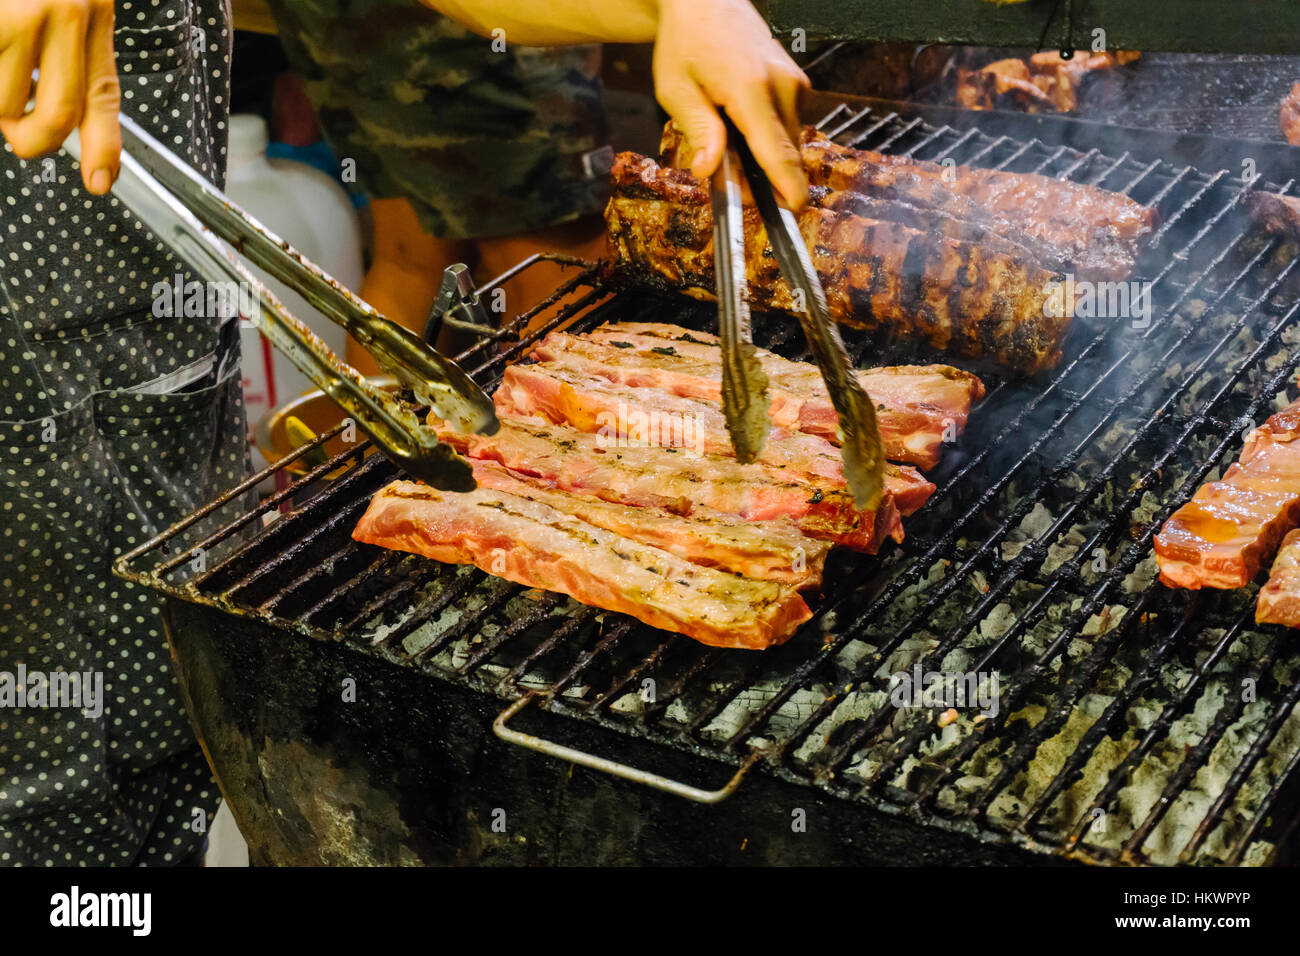 Grilled meat on the barbecue rack outdoor food items set. Street food BBQ grill tools. Concept of eating outdoors in the weekend. Stock Photo